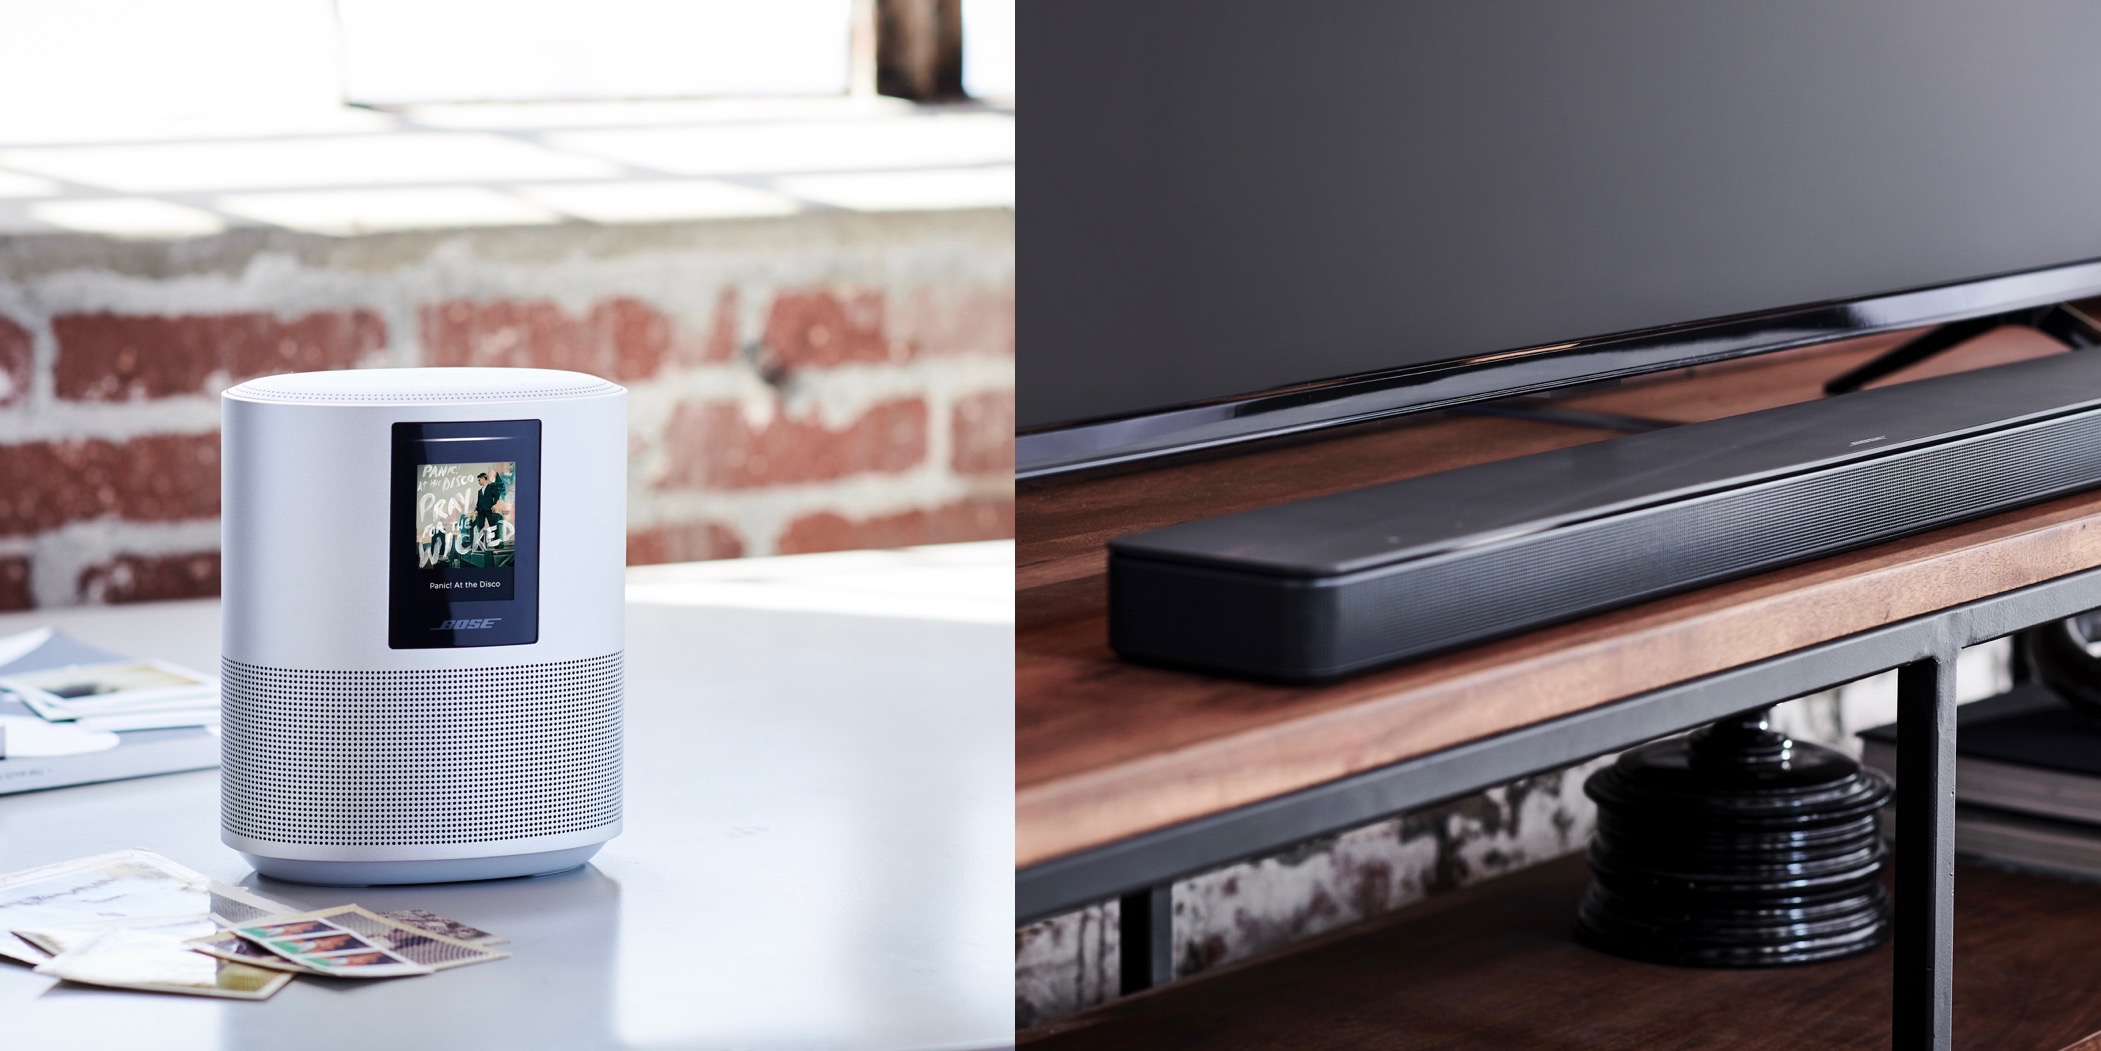 control, and soundbars unveils and soon coming AirPlay Bose Alexa Assistant Google 2 smart voice speaker new with